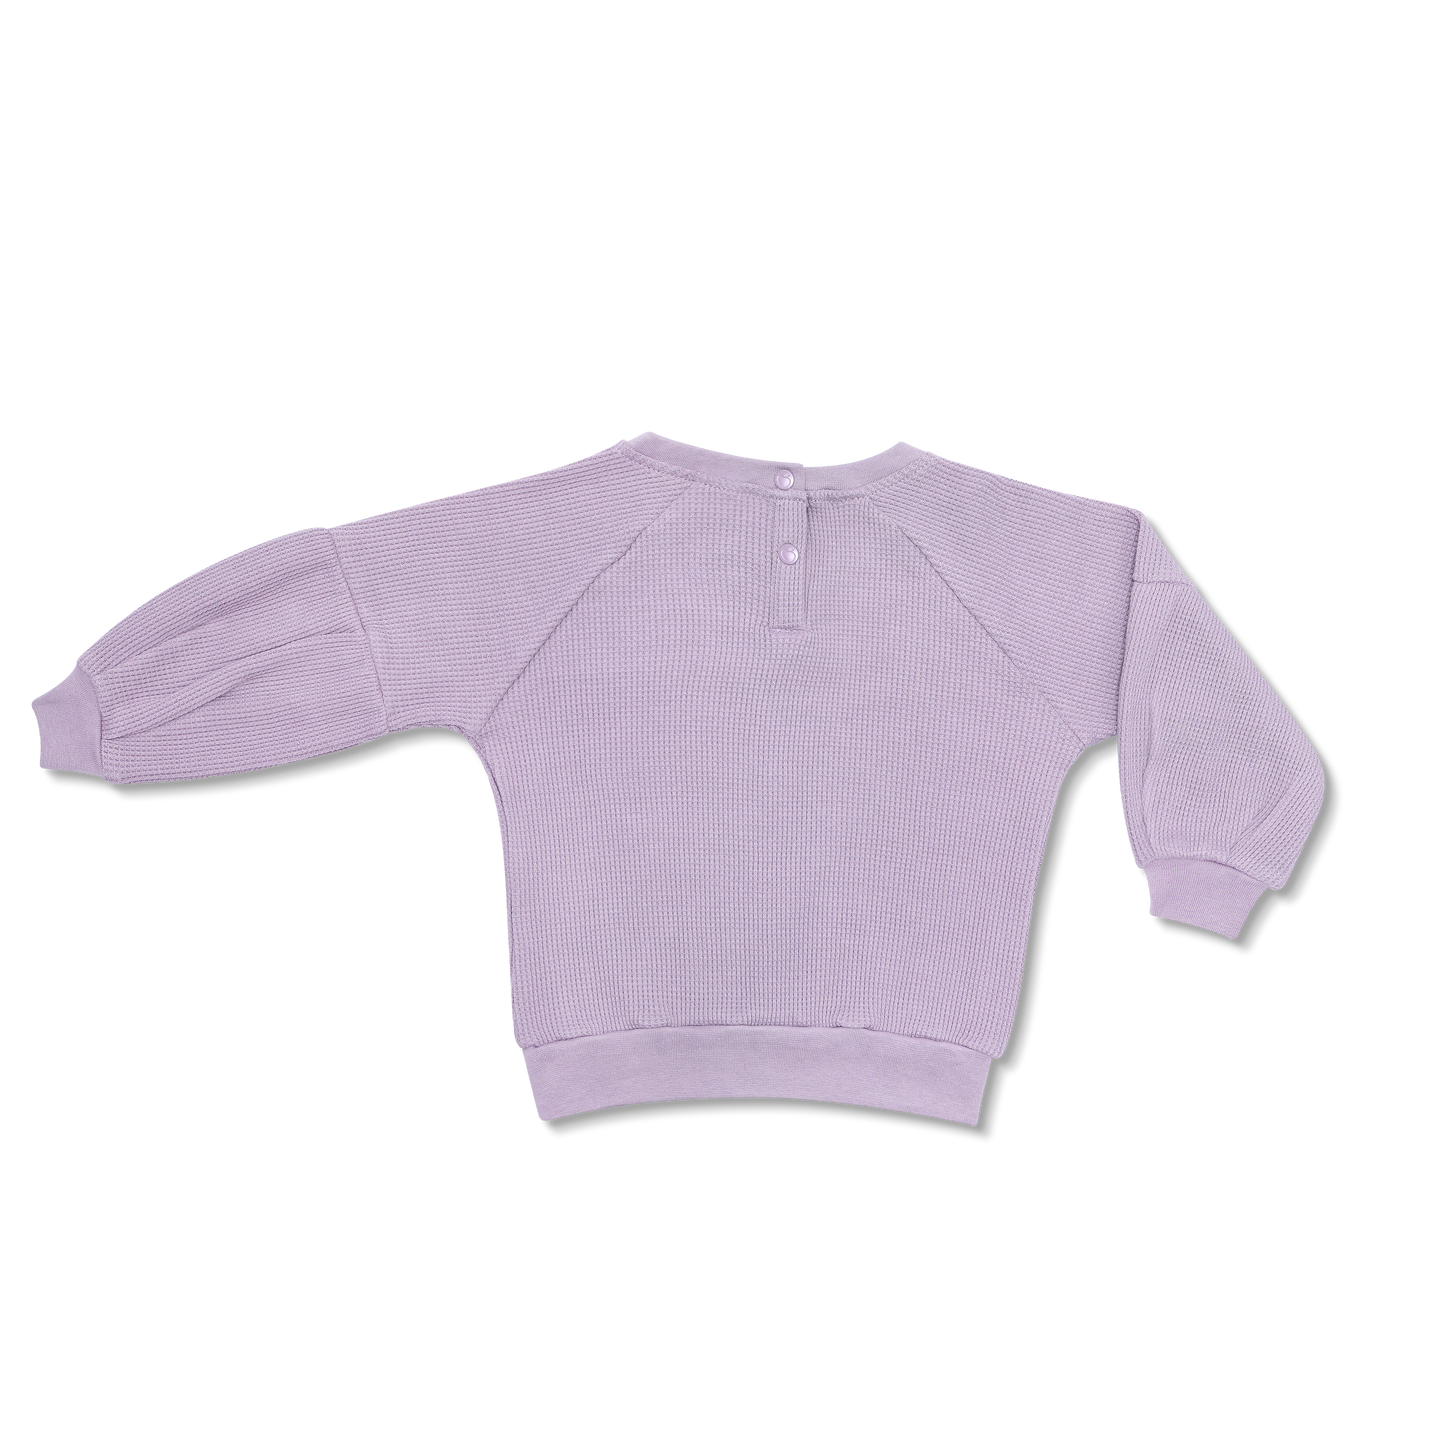 Your little one will be cute and cozy in this 100% organic cotton balloon sleeve sweatshirt. Complete with monochrome apple logo snaps at the shoulder for no-fuss dressing. Pair with the Waffle Joggers!